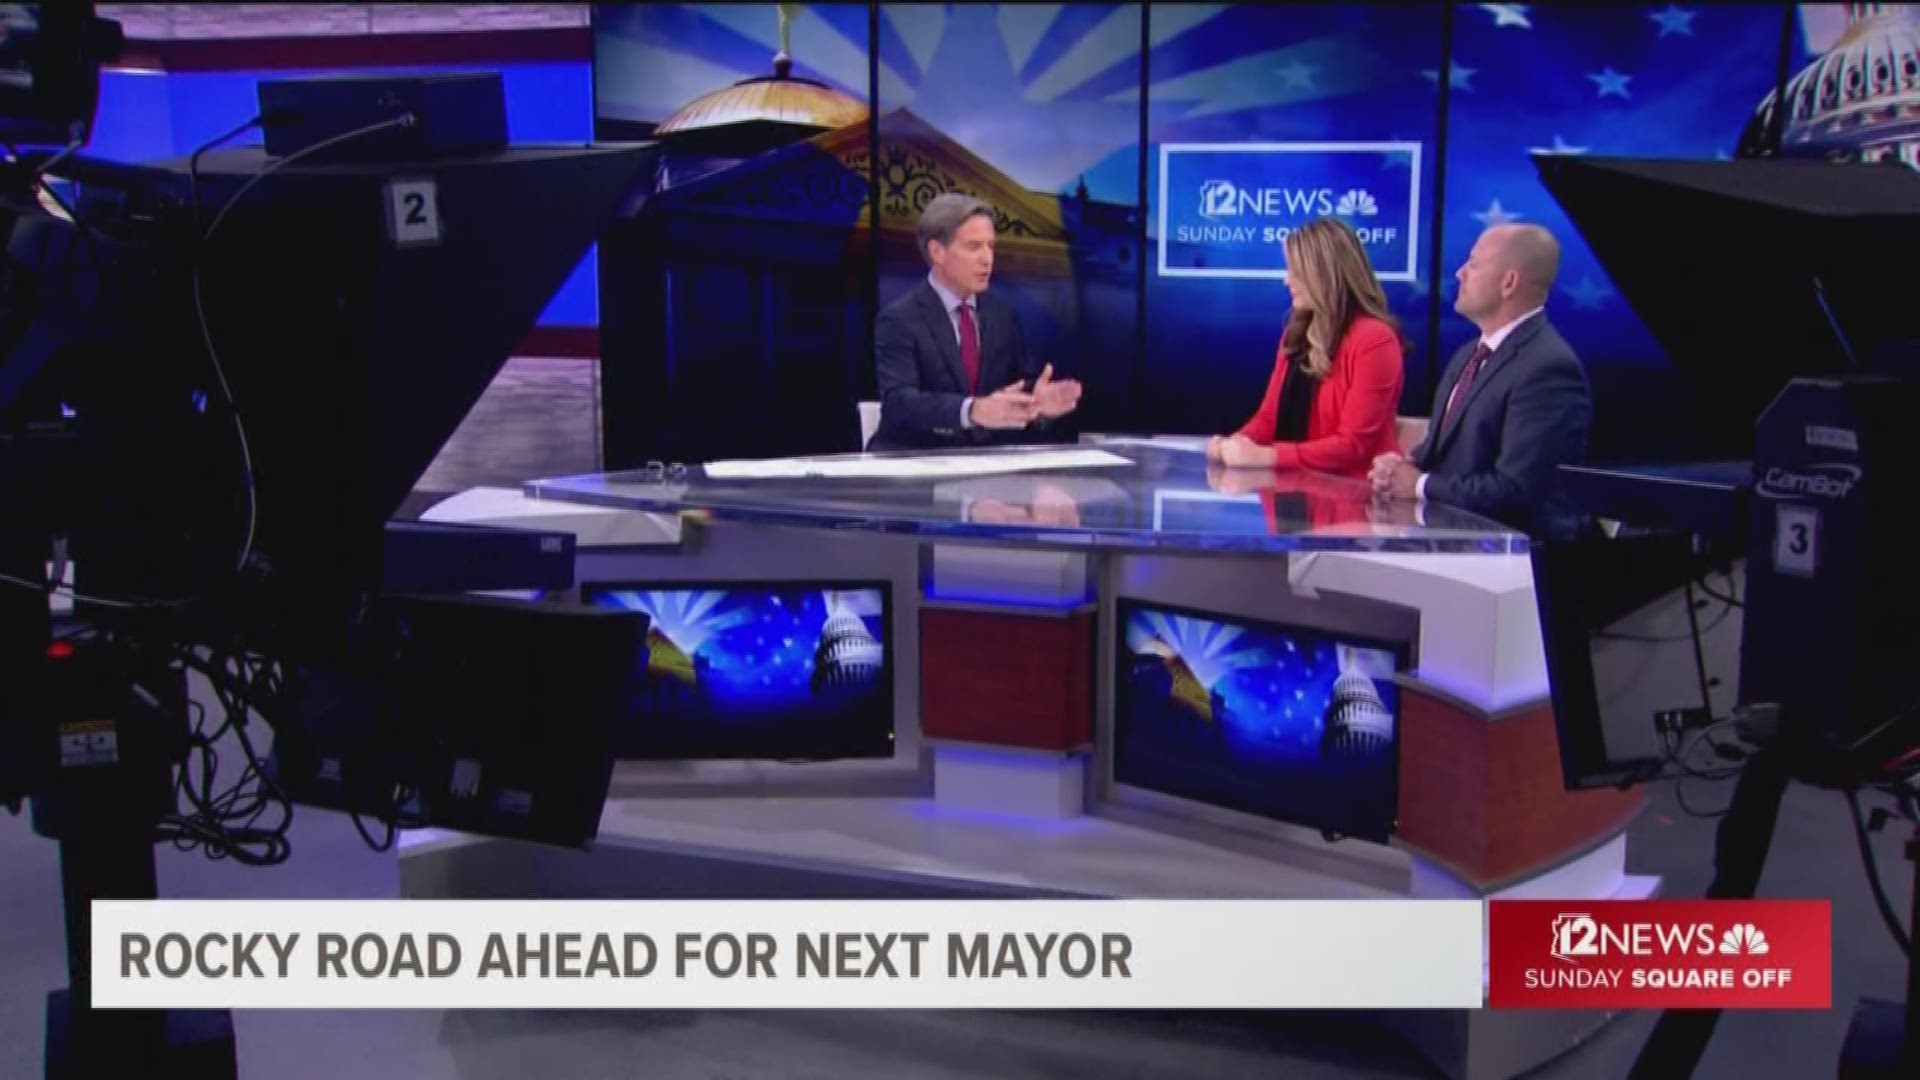 Whoever wins the Phoenix mayor’s race faces daunting challenges: major labor contracts, a fractured council and another election for mayor next year. Our ‘Square Off’ panels breaks down the challenges and the big money flowing into the race.